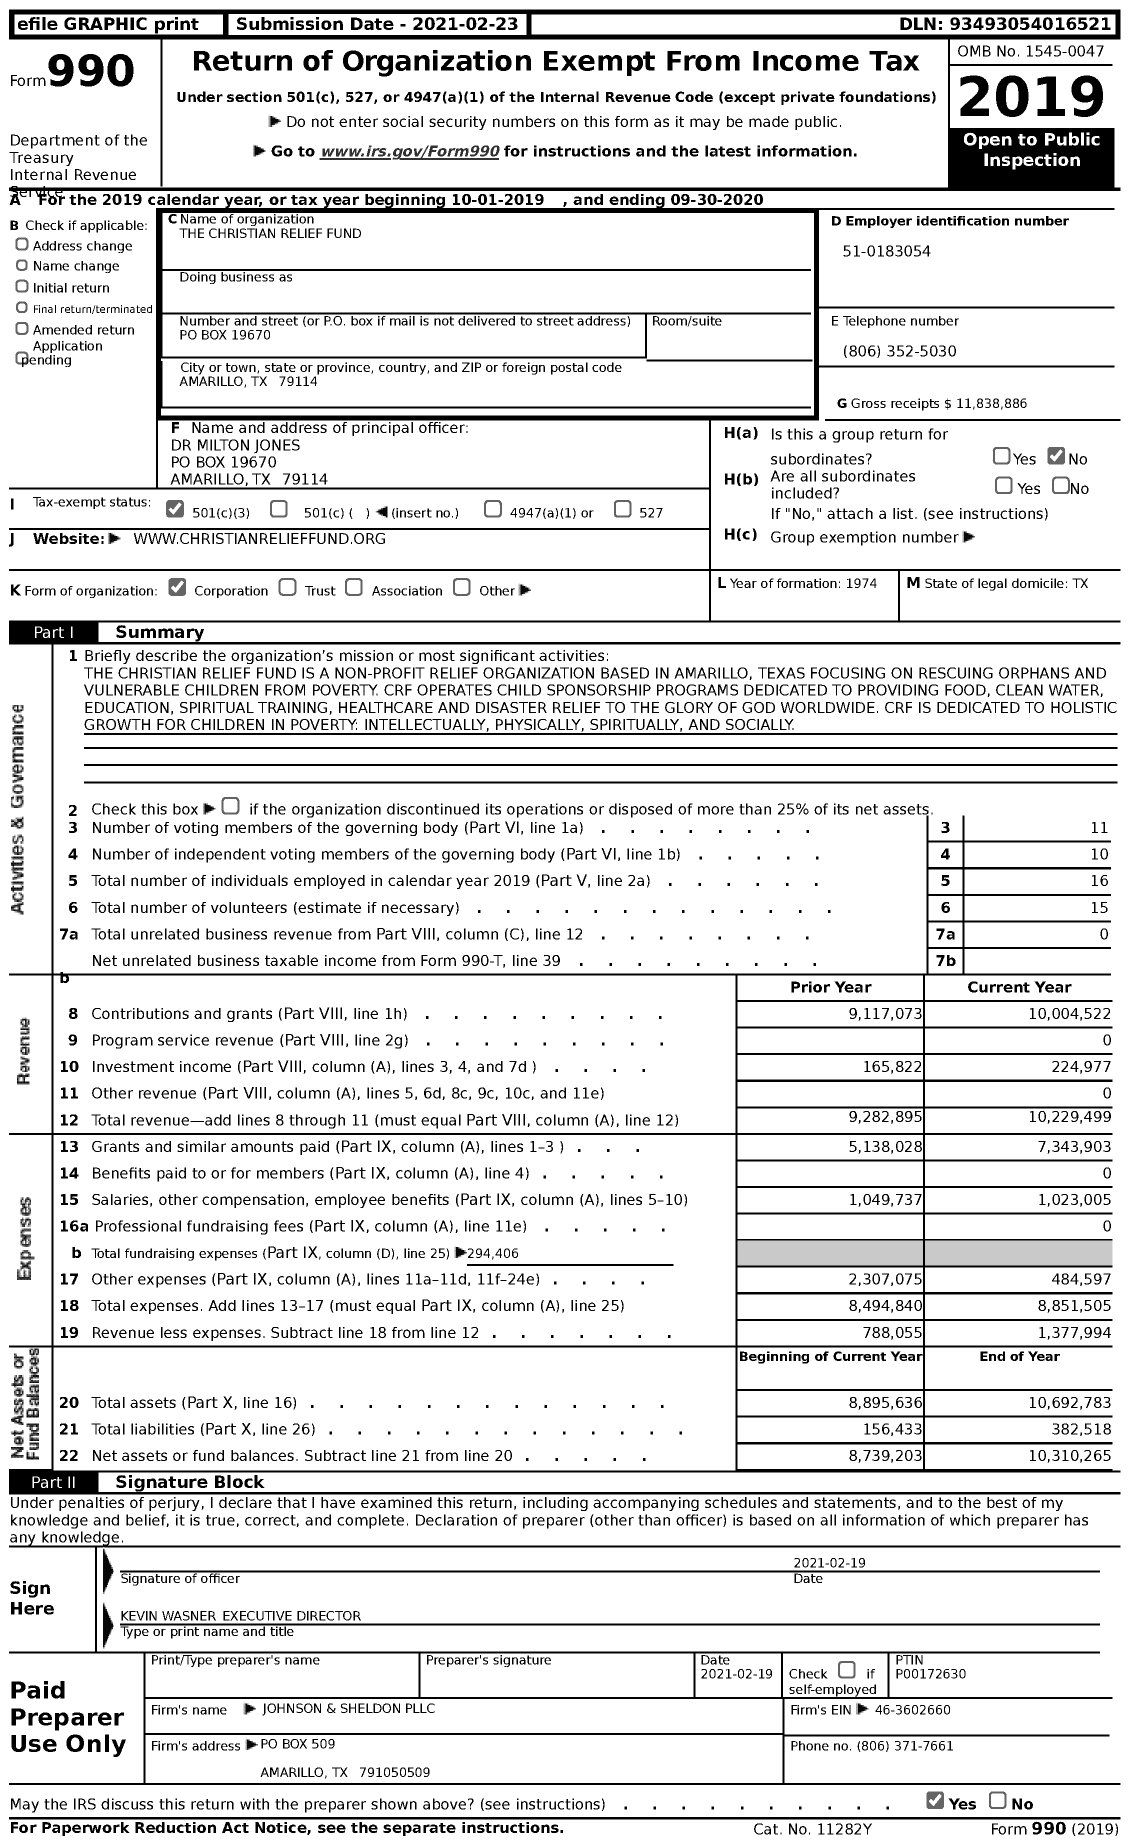 Image of first page of 2019 Form 990 for Christian Relief Fund (CRF)